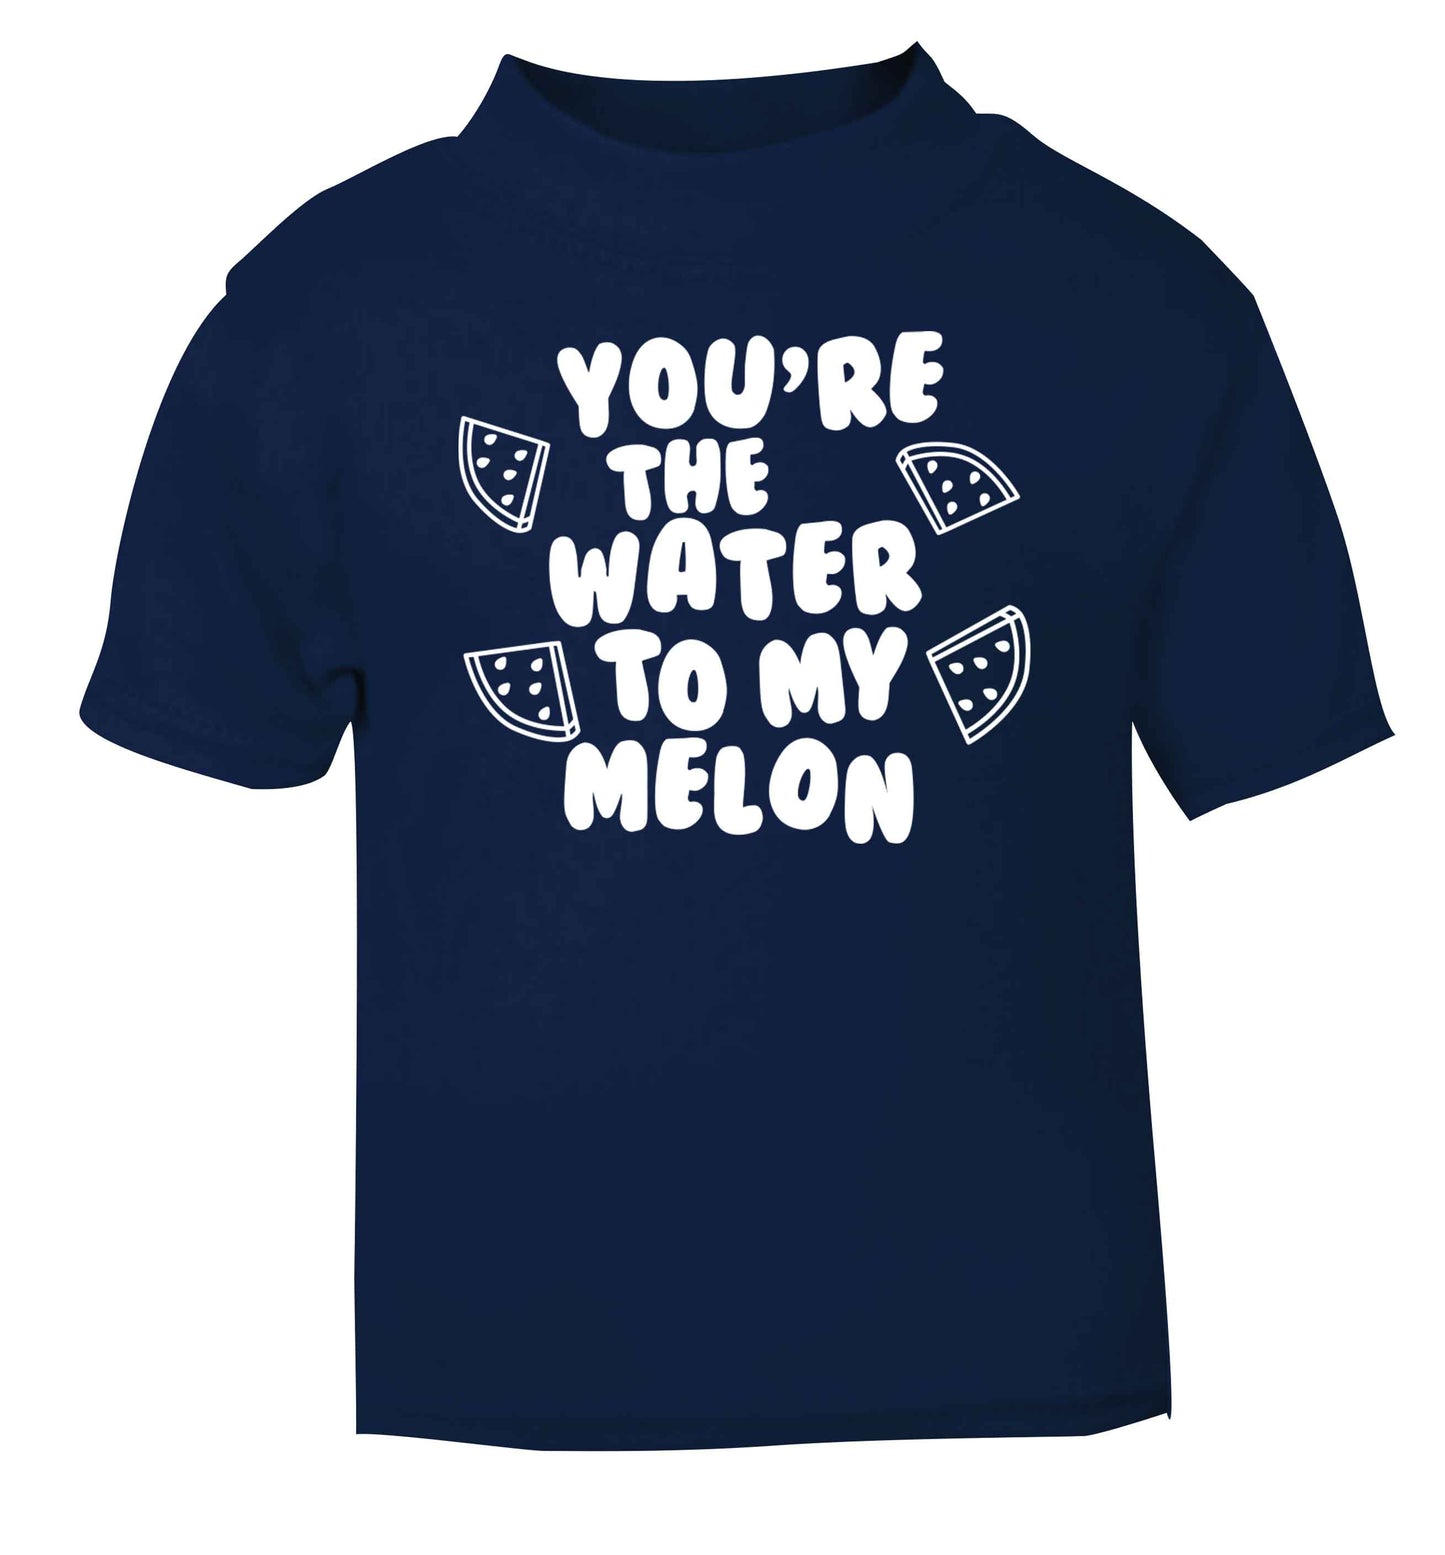 You're the water to my melon navy baby toddler Tshirt 2 Years